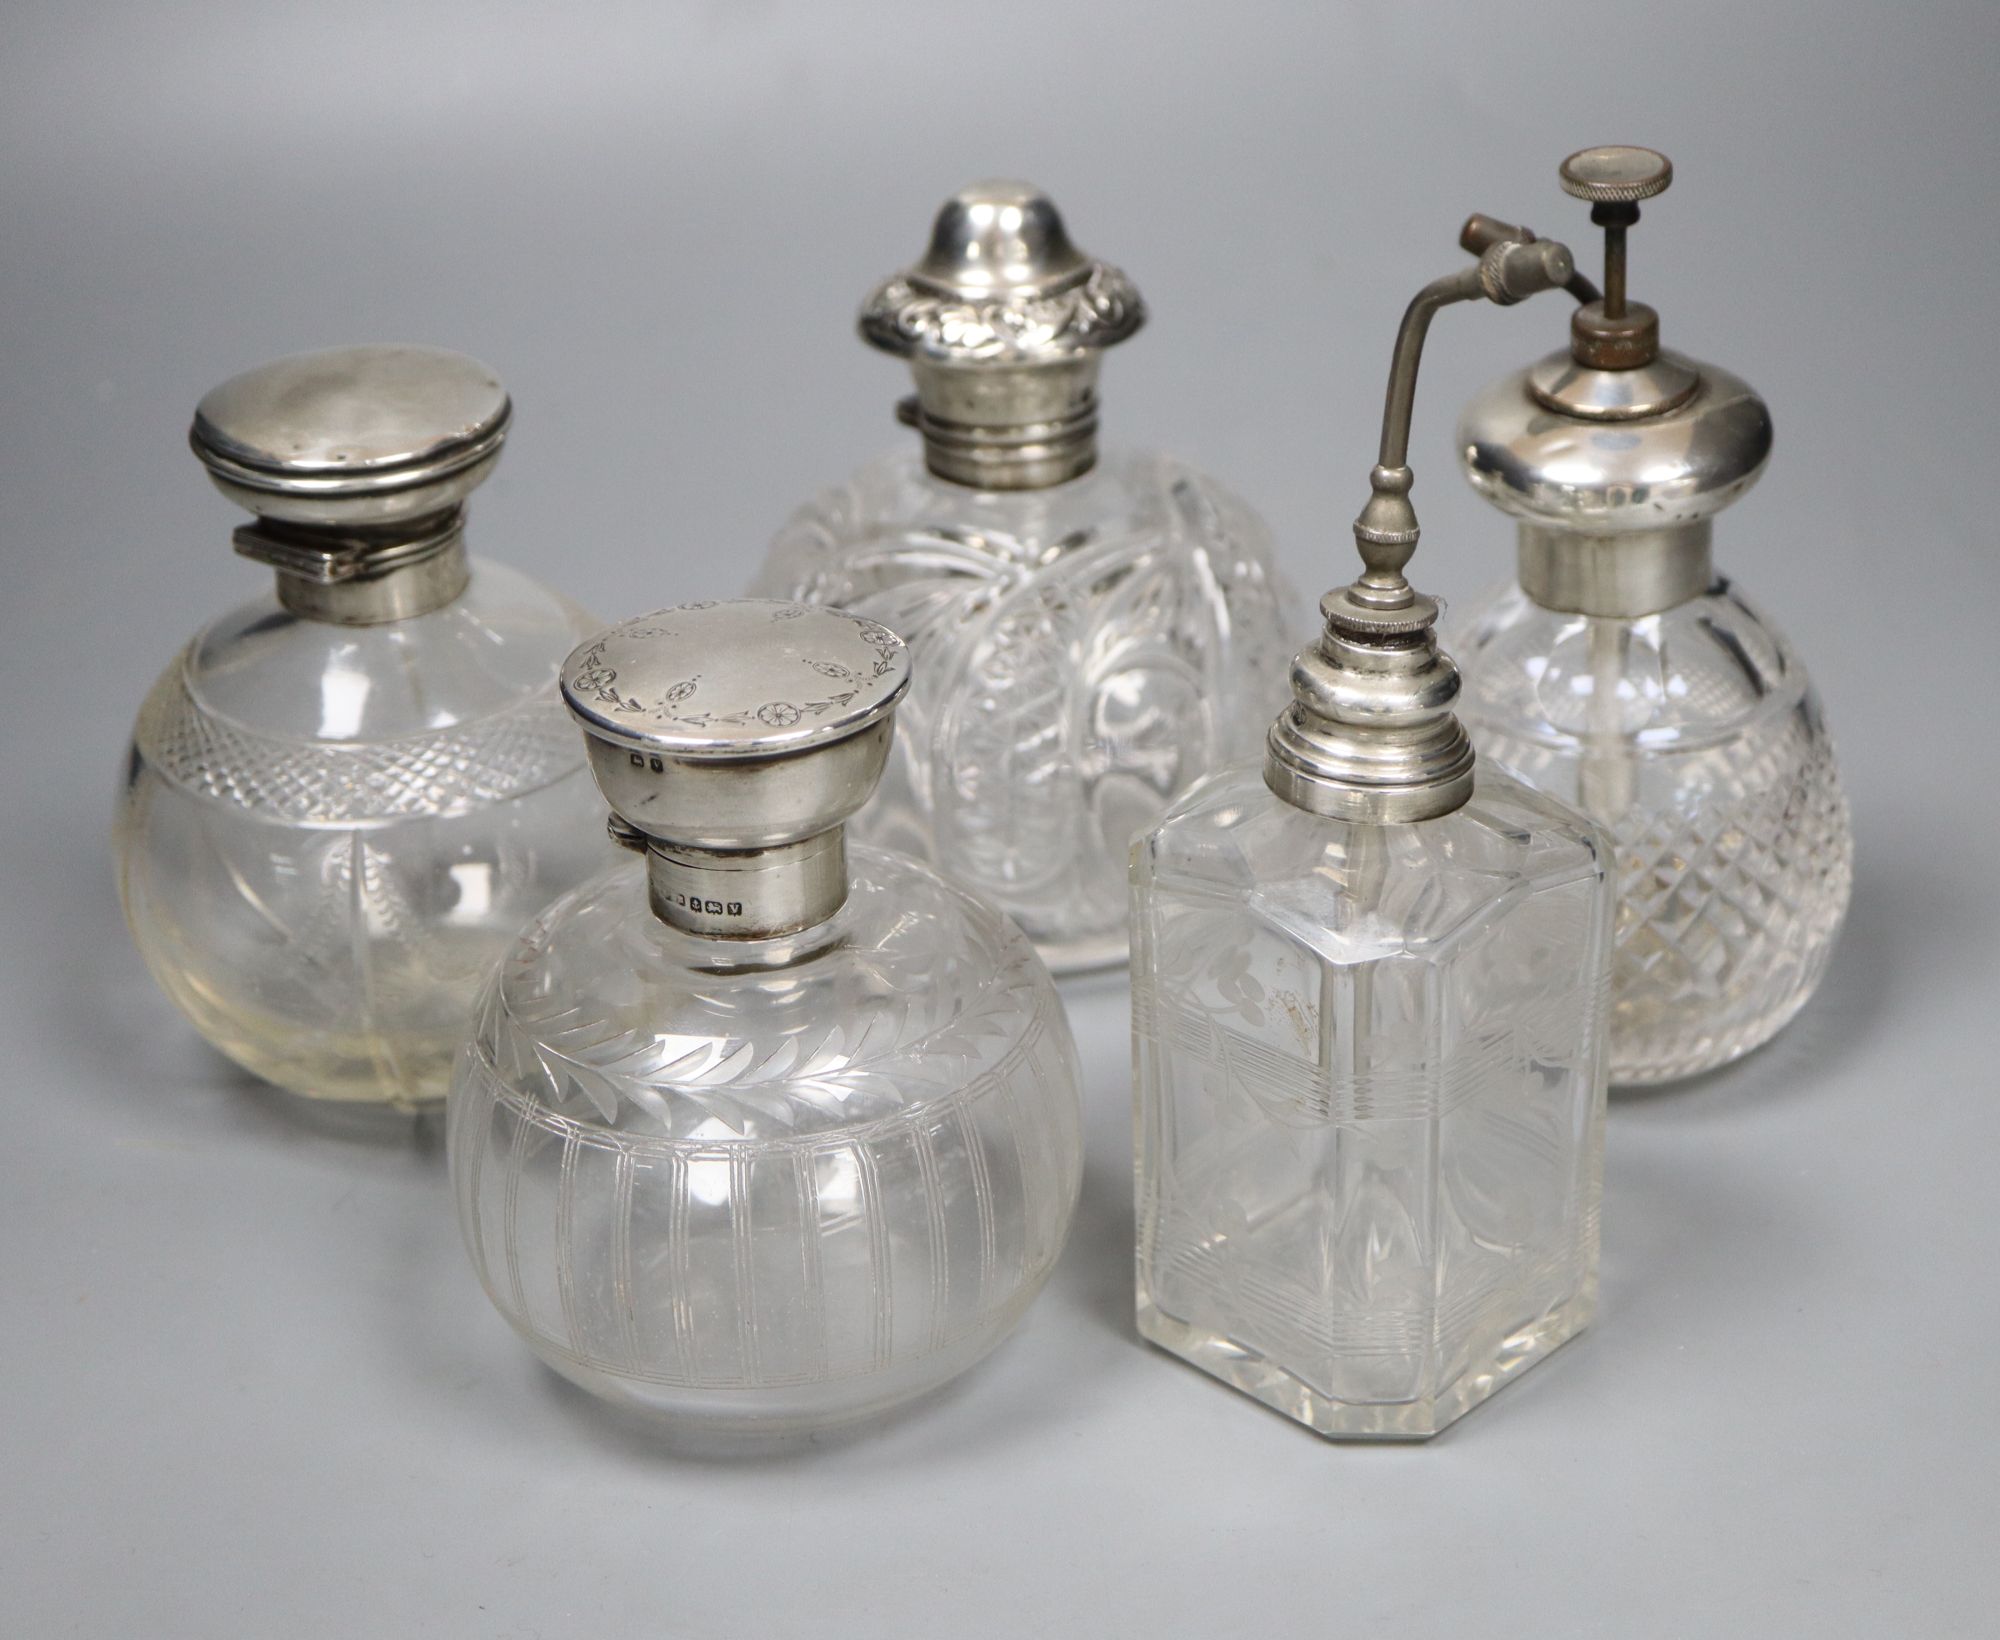 Two silver mounted glass atomisers and three silver mounted glass scent bottles, tallest overall 16cm.